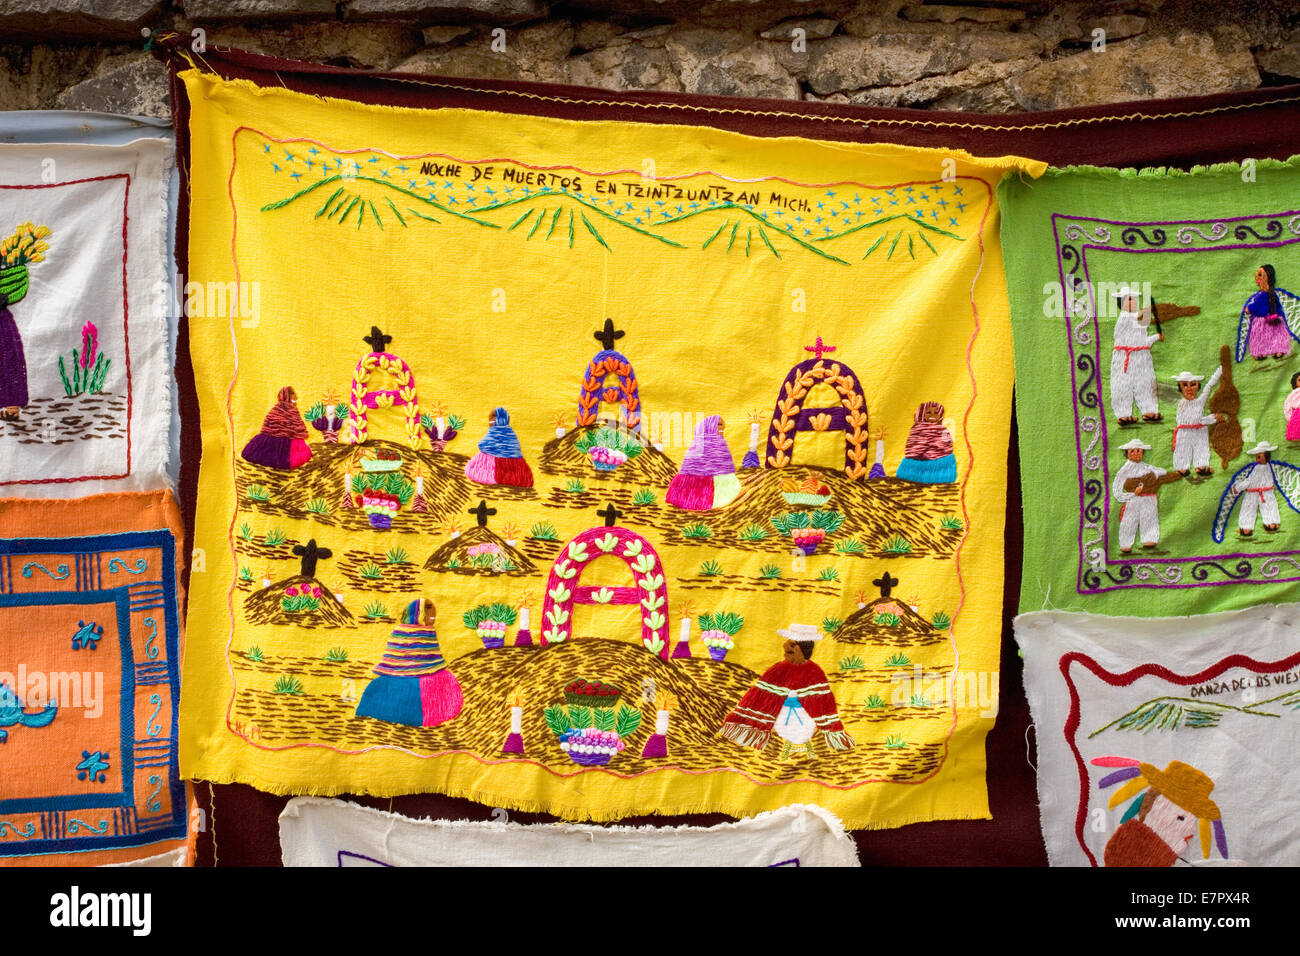 A hand stitched placemat depicts Day of the Dead ni Tzintzuntzan, Michoacan, Mexico. Stock Photo